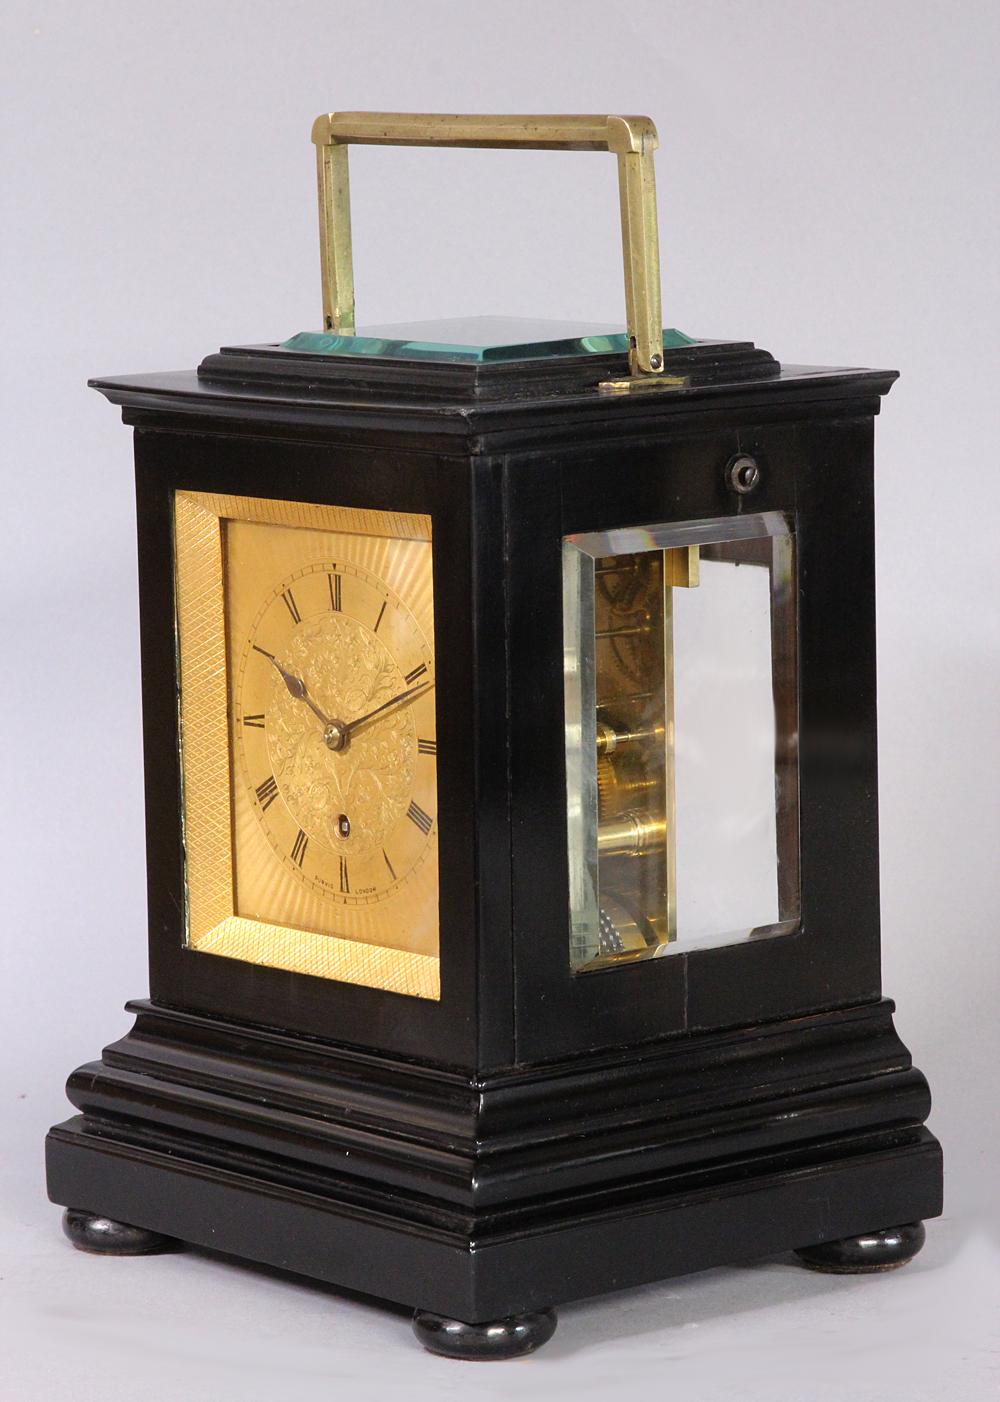 Maker: 
Alexander Purvis, London.

Case: 
The small ebonized case has a shaped. molded base, a brass hinged handle, bun feet and thick beveled glasses to the sides and top.

Dial: 
The gilt dial has engine-turning around the outside of the